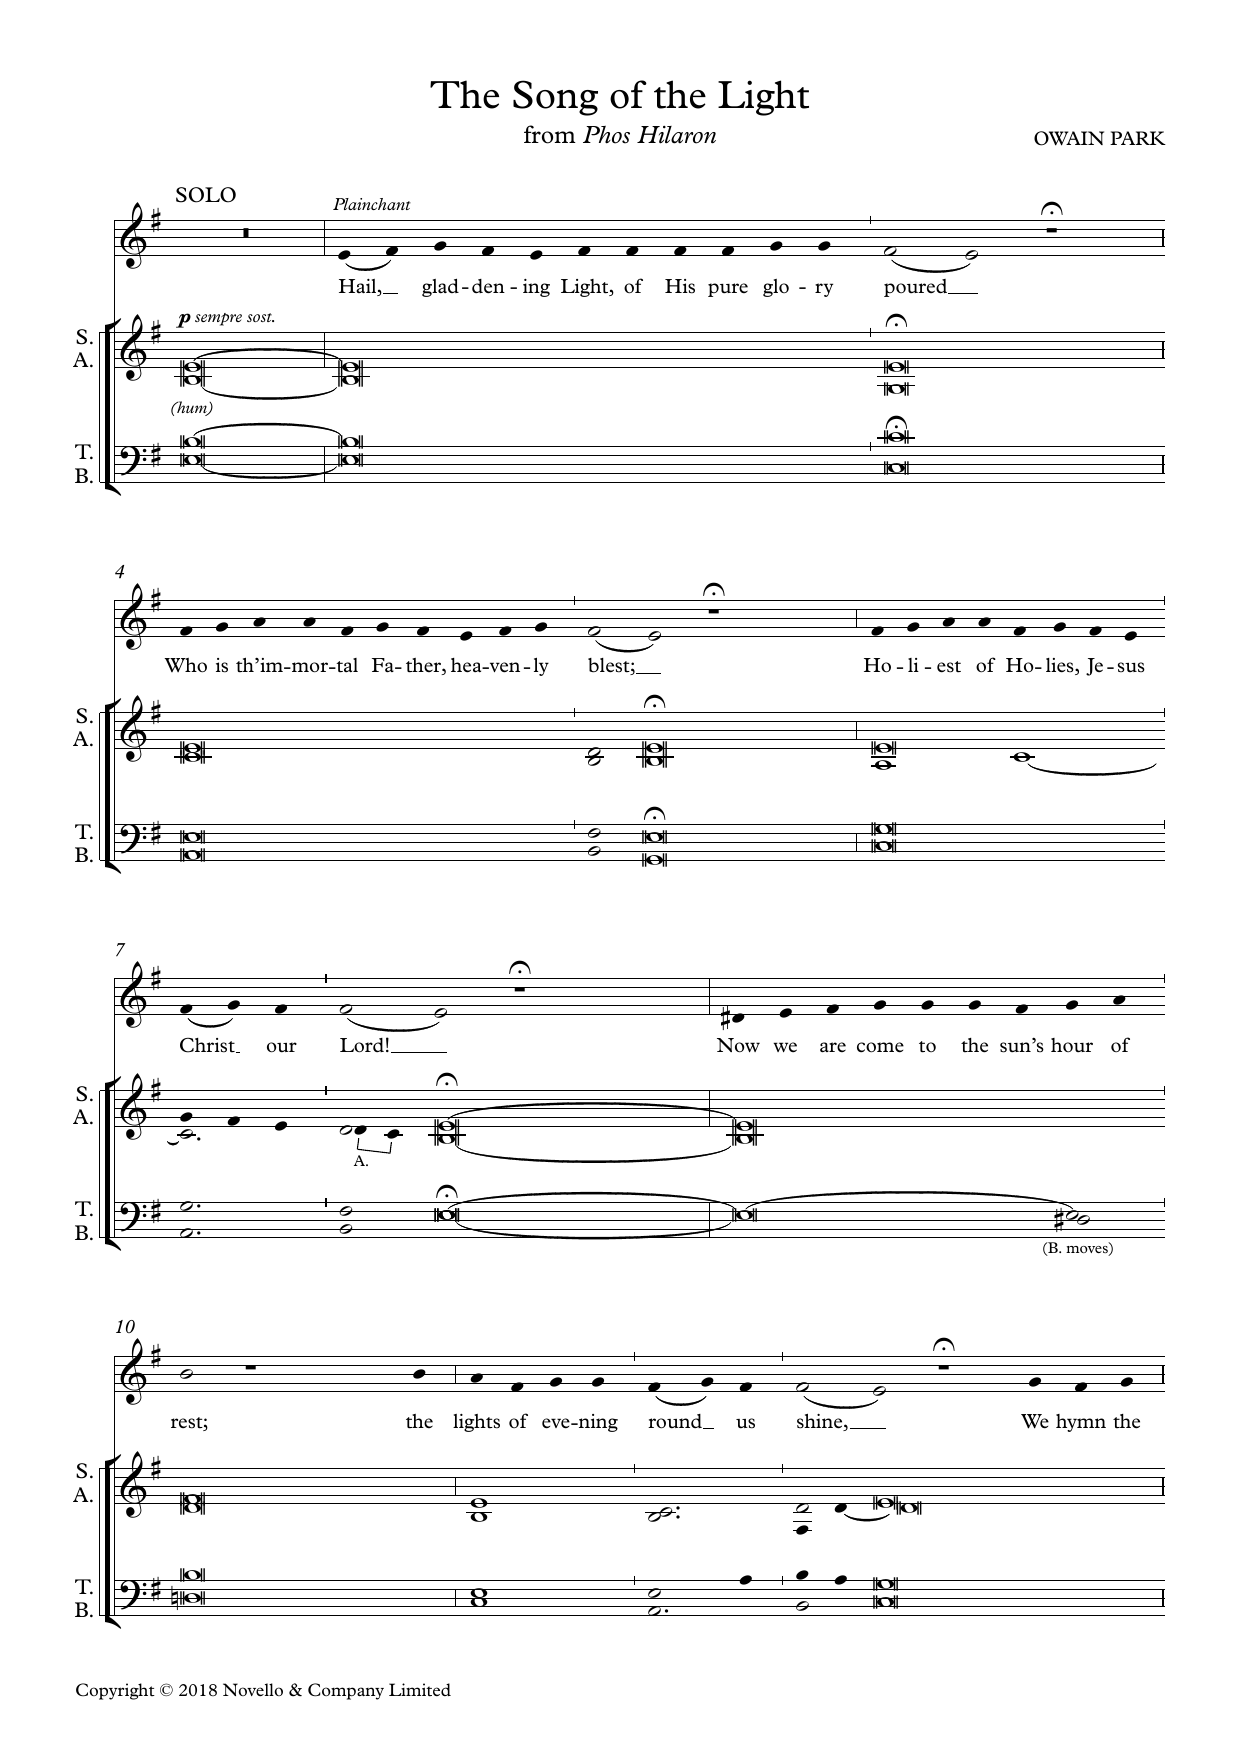 Download Owain Park The Song Of The Light (from Phos Hilaro Sheet Music